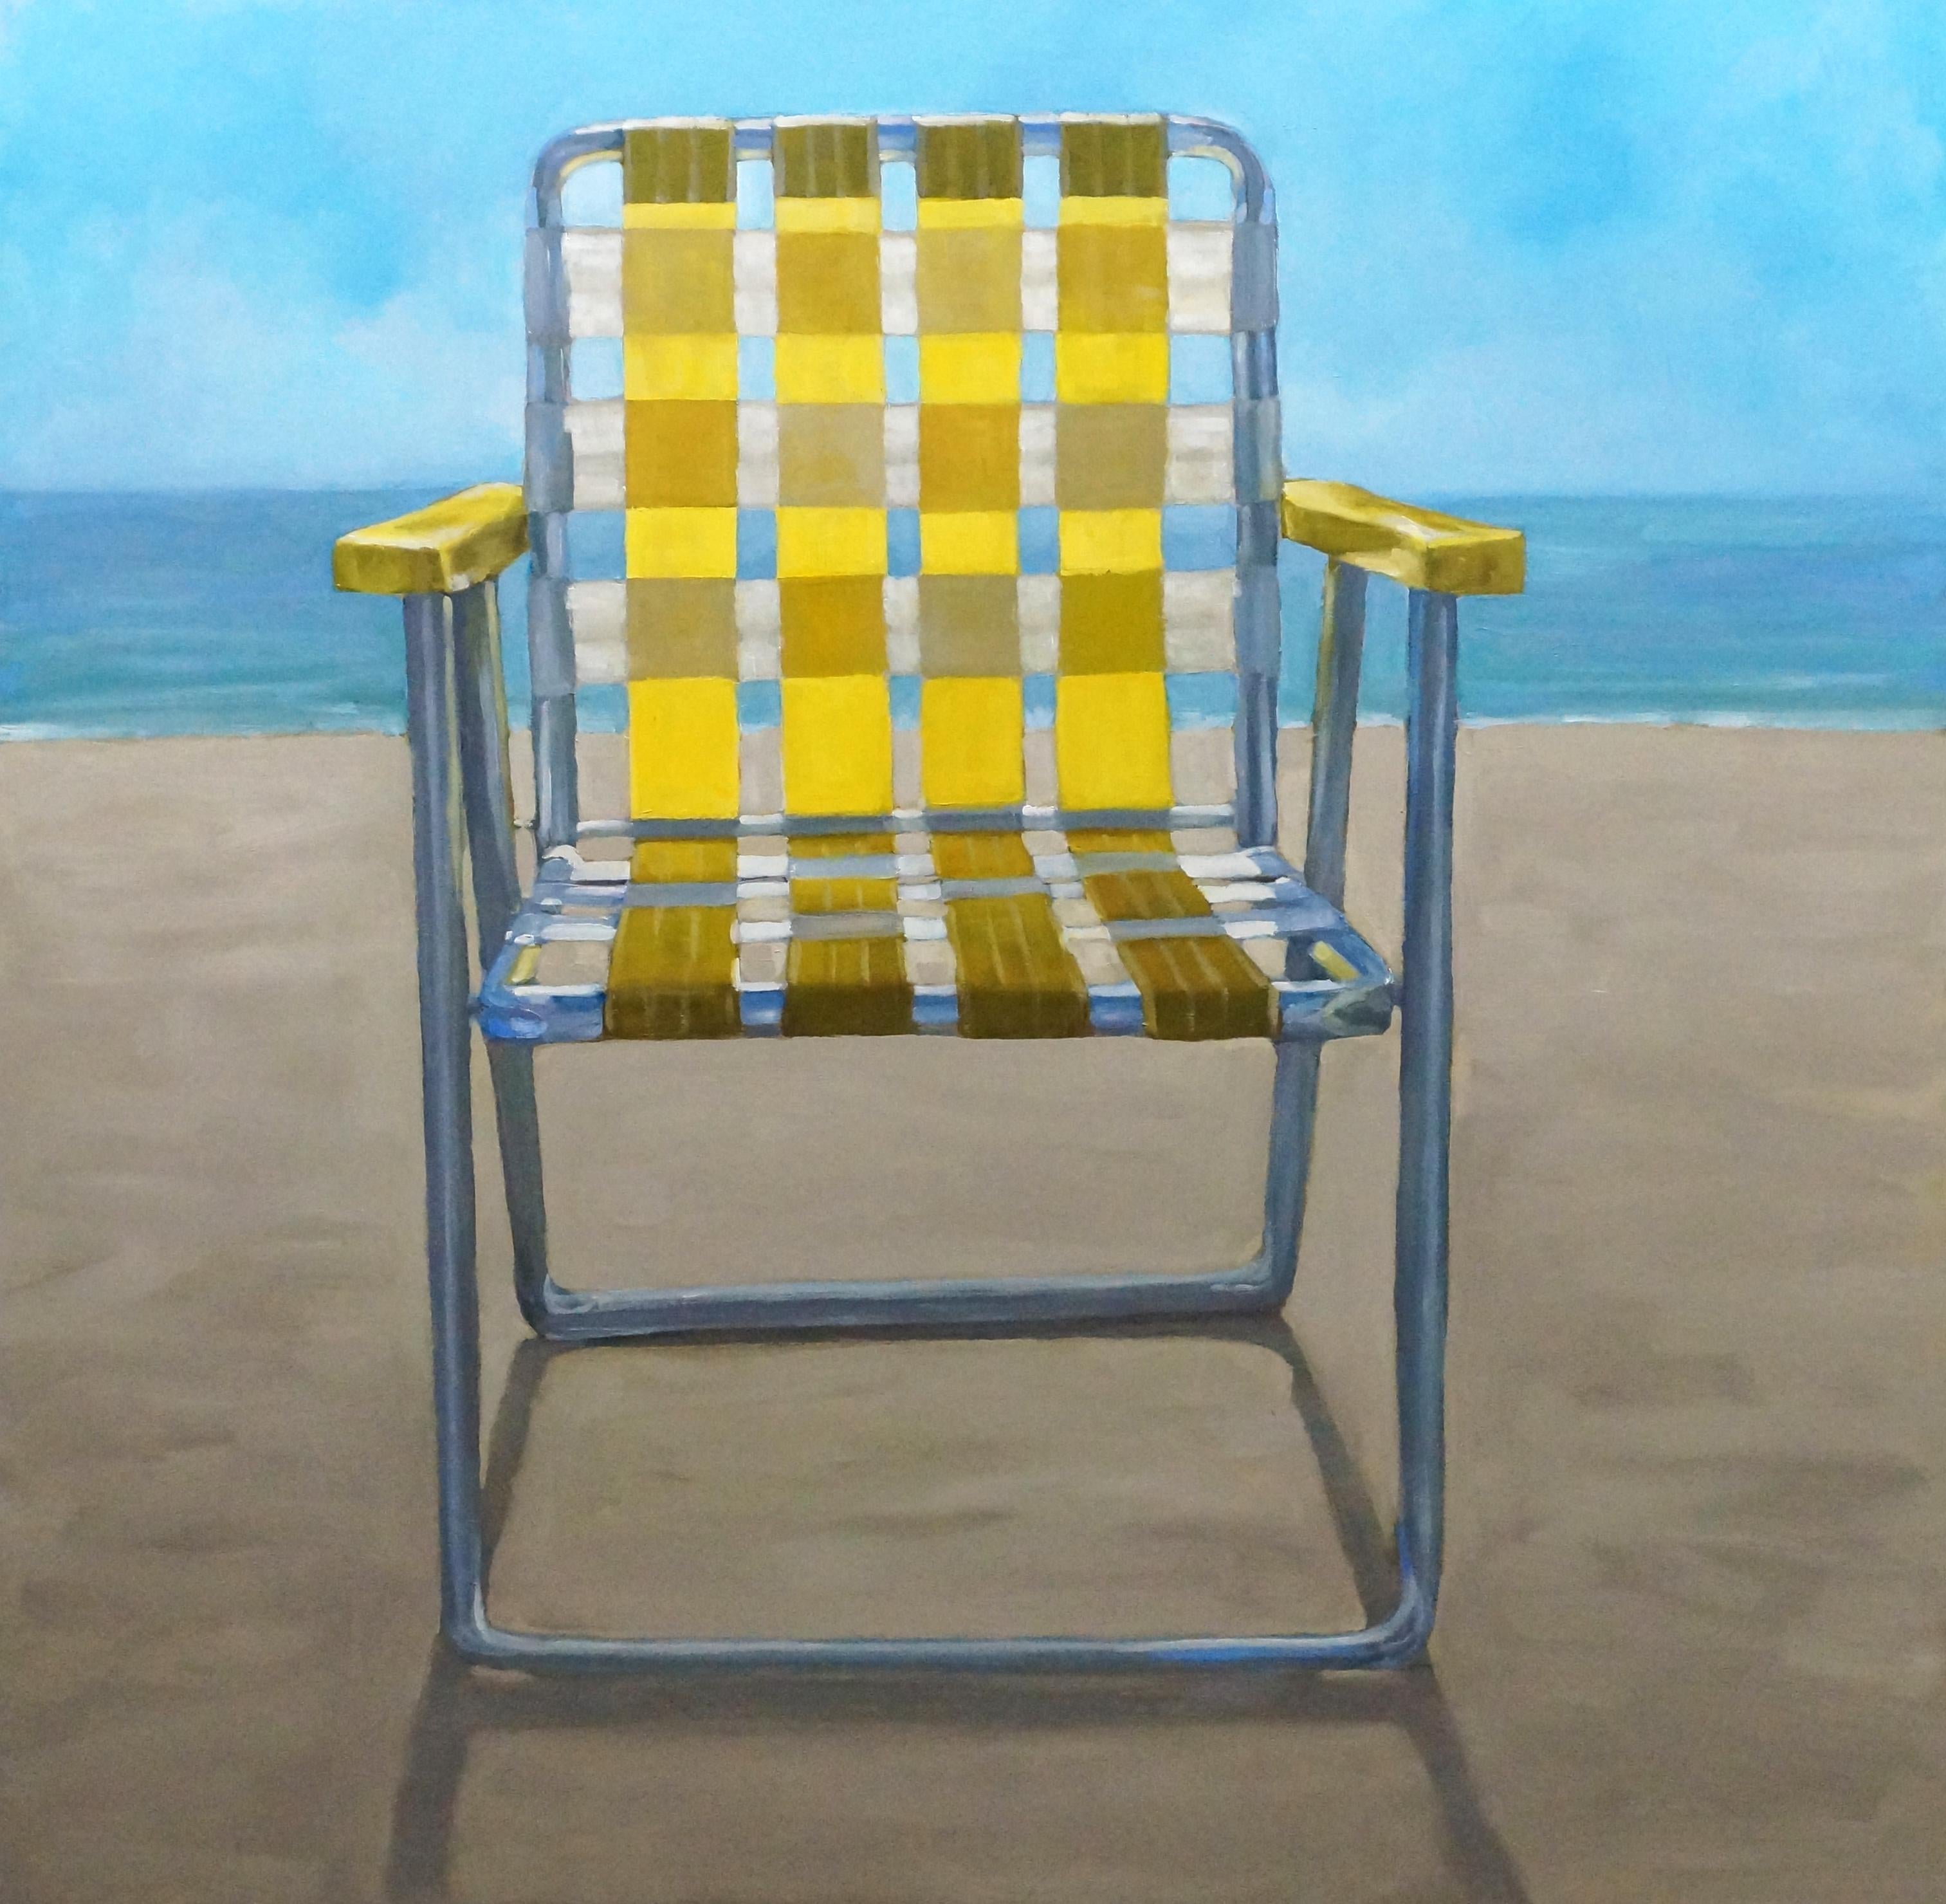 Carol O'Malia Still-Life Painting - "Yellow Respite" oil painting of a yellow and white beach chair in the sand